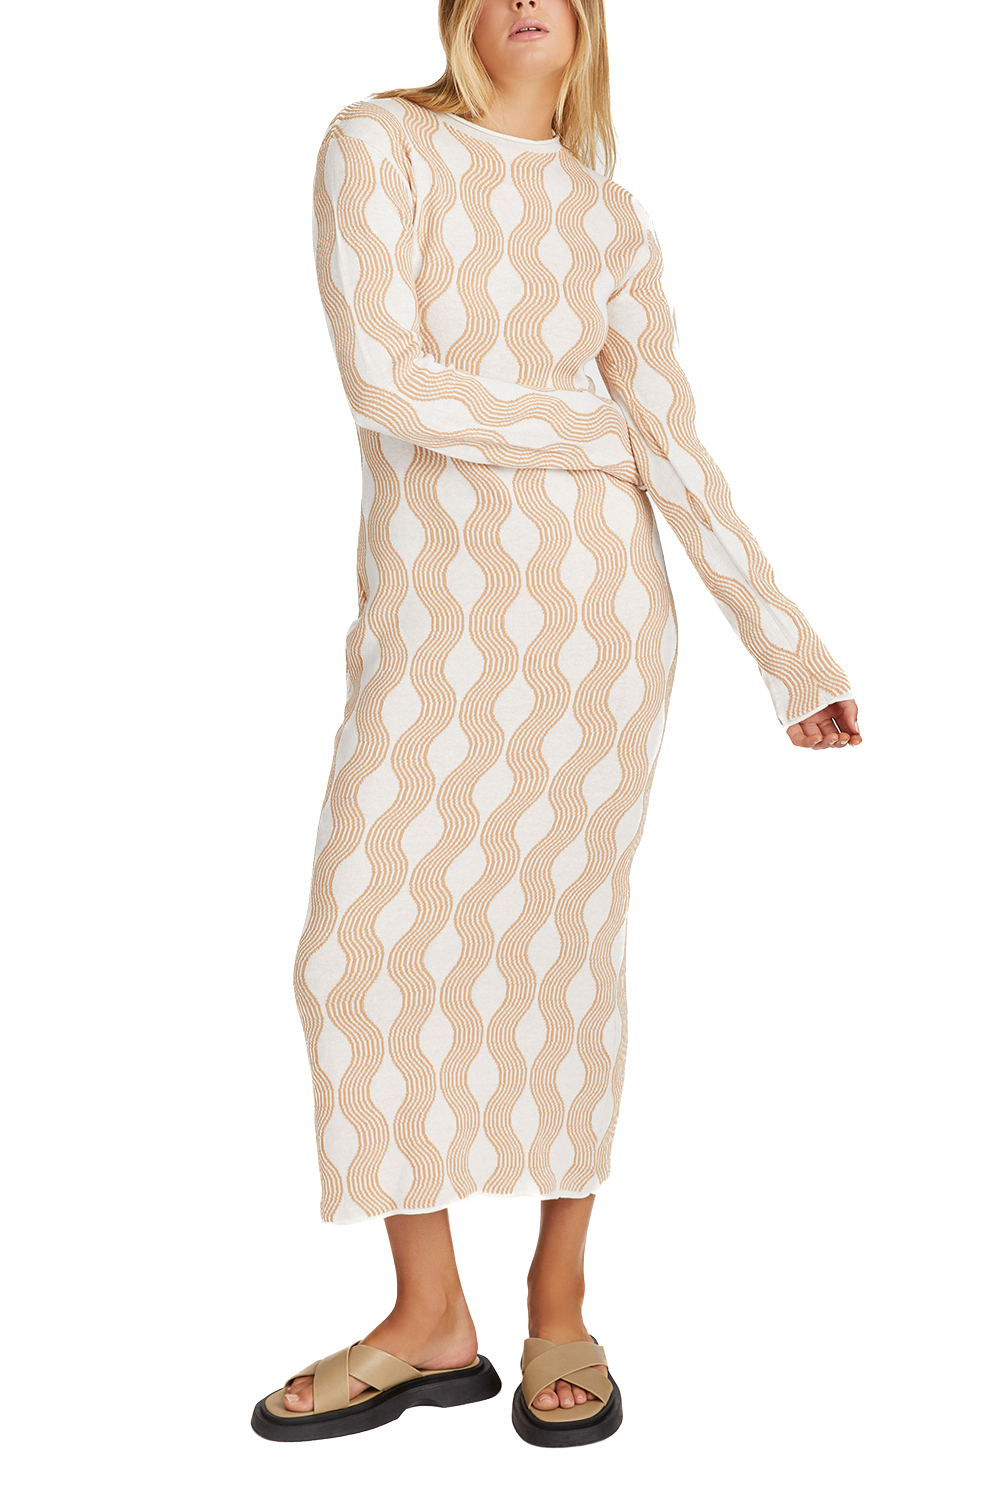 Tan Wave Knitted Cotton Dress